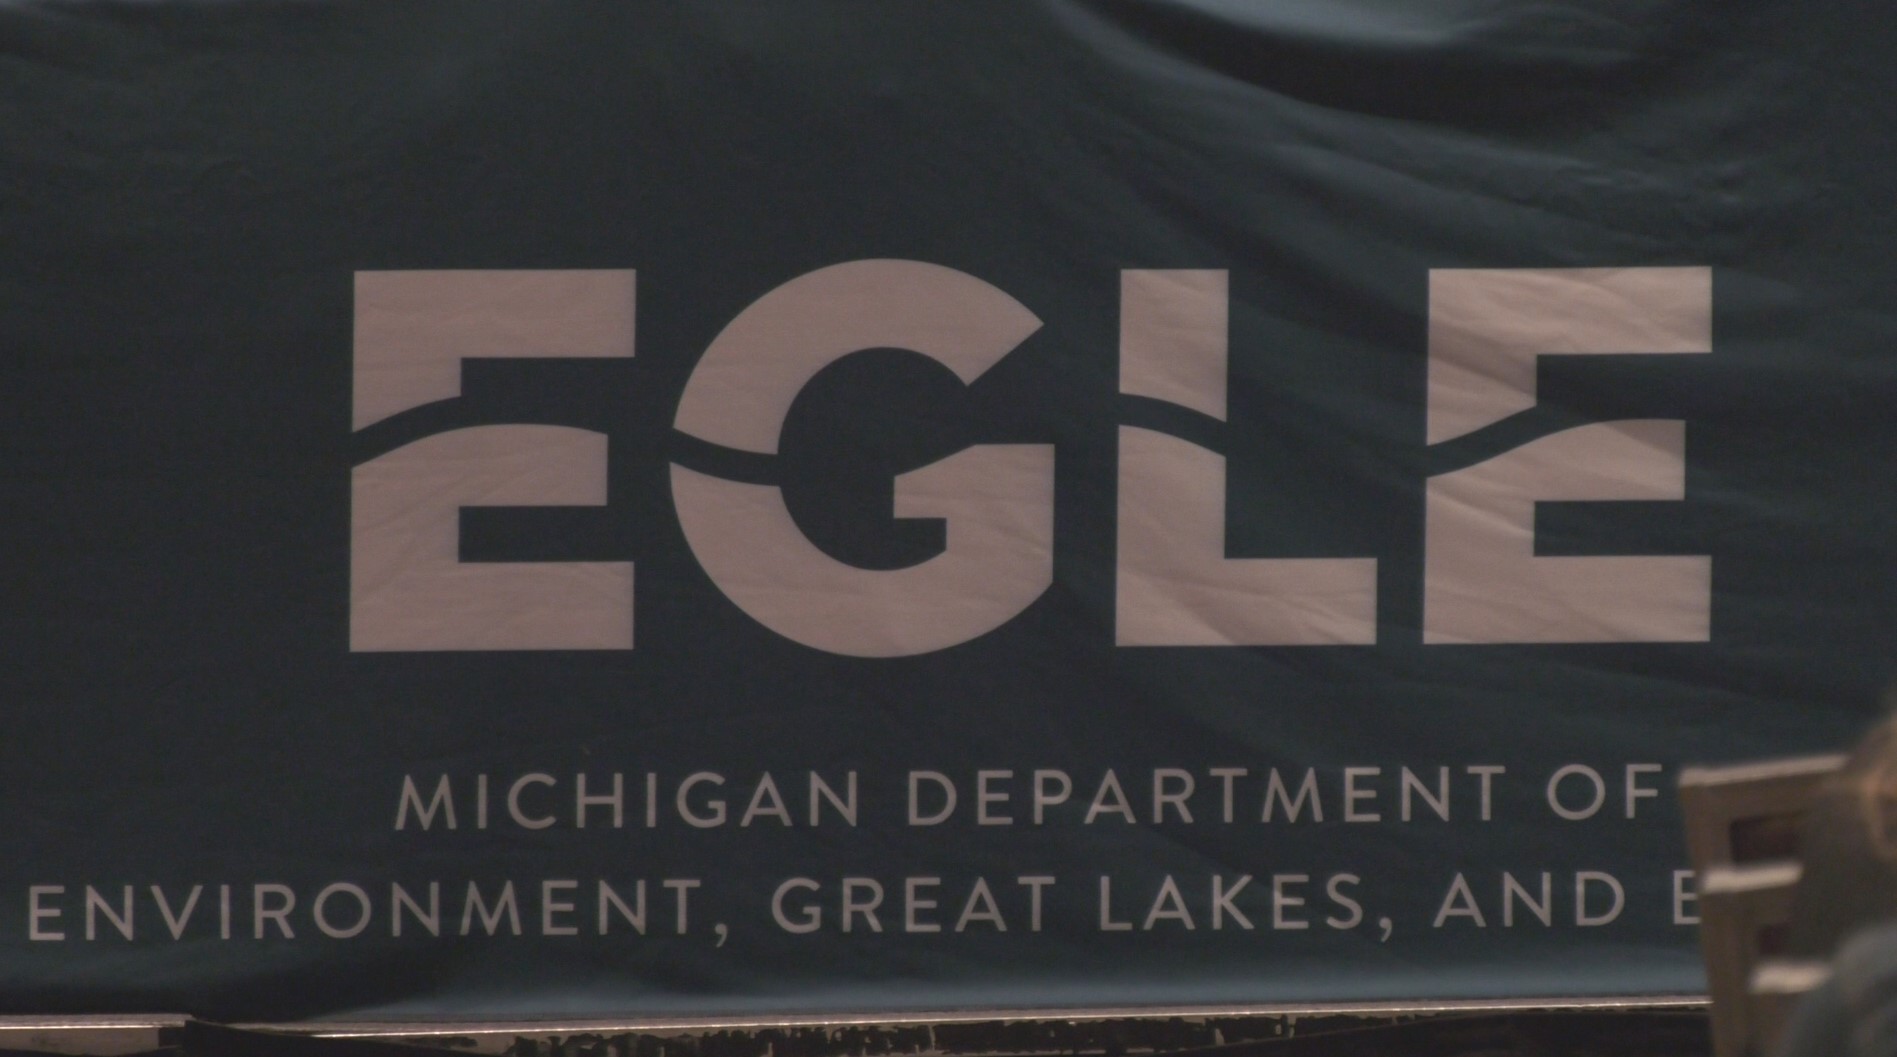 The Director of the Michigan Department for Environment, Great Lakes and Energy comments on the 2025 budget